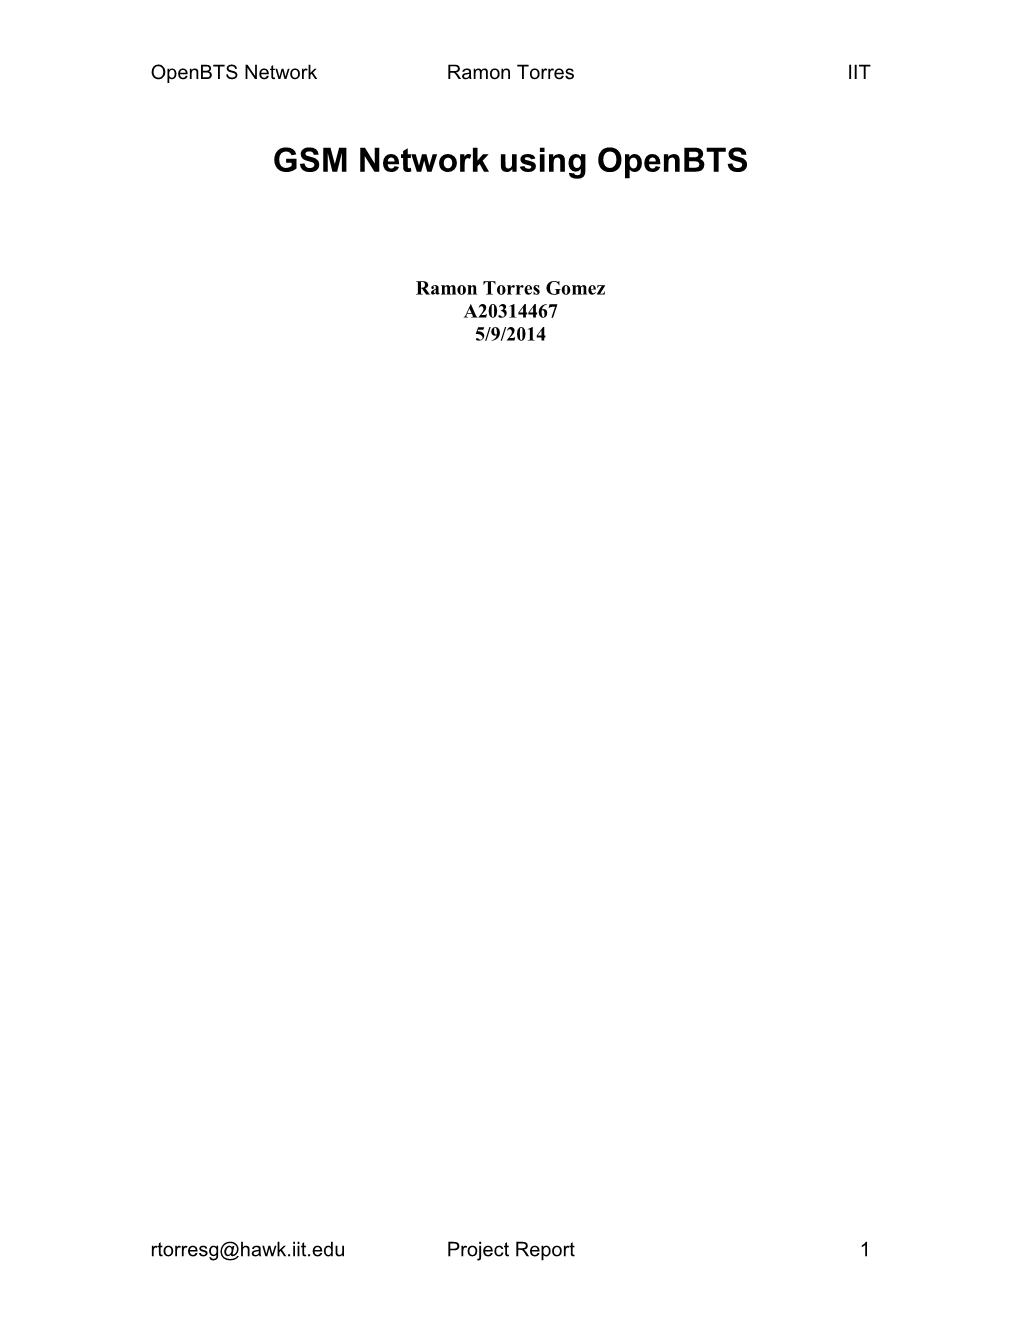 GSM Network Using Openbts